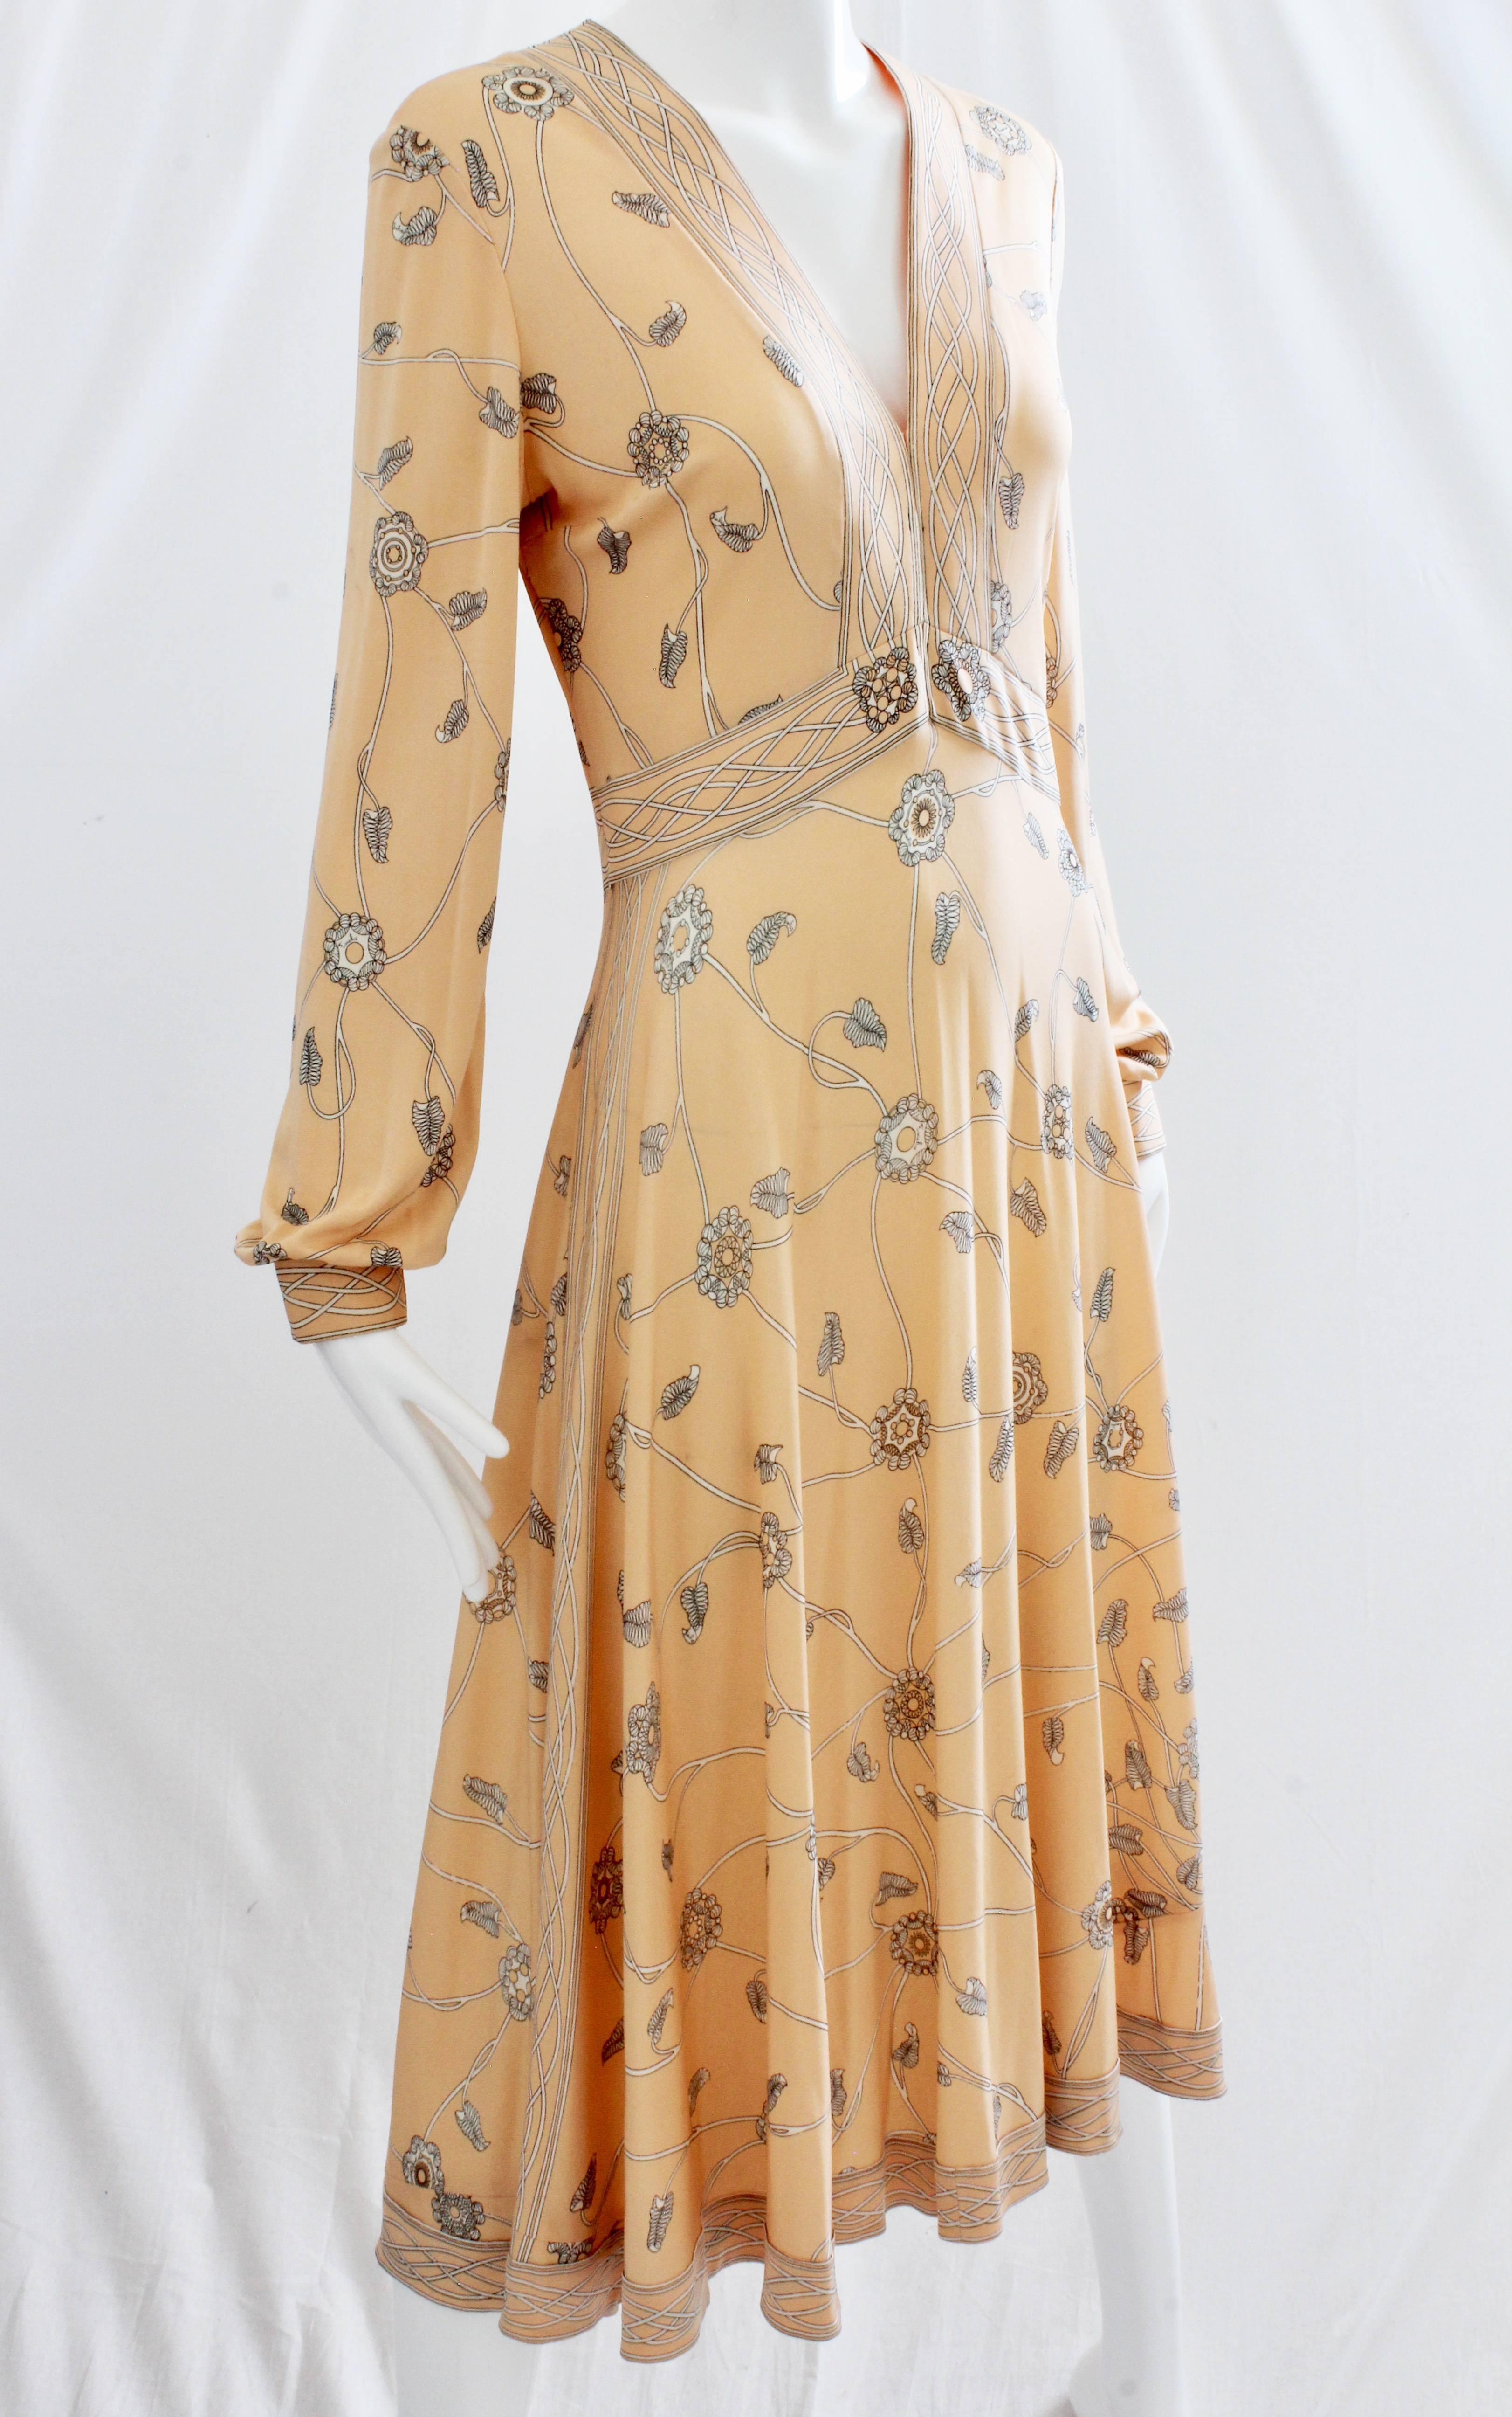 Here's one gorgeous silk jersey dress from Emilio Pucci, likely made in the late 1960s or early 70s. It features bishop sleeves and cinched waist, and fastens with a hidden zipper under the wearers left arm. In excellent condition for its age, we